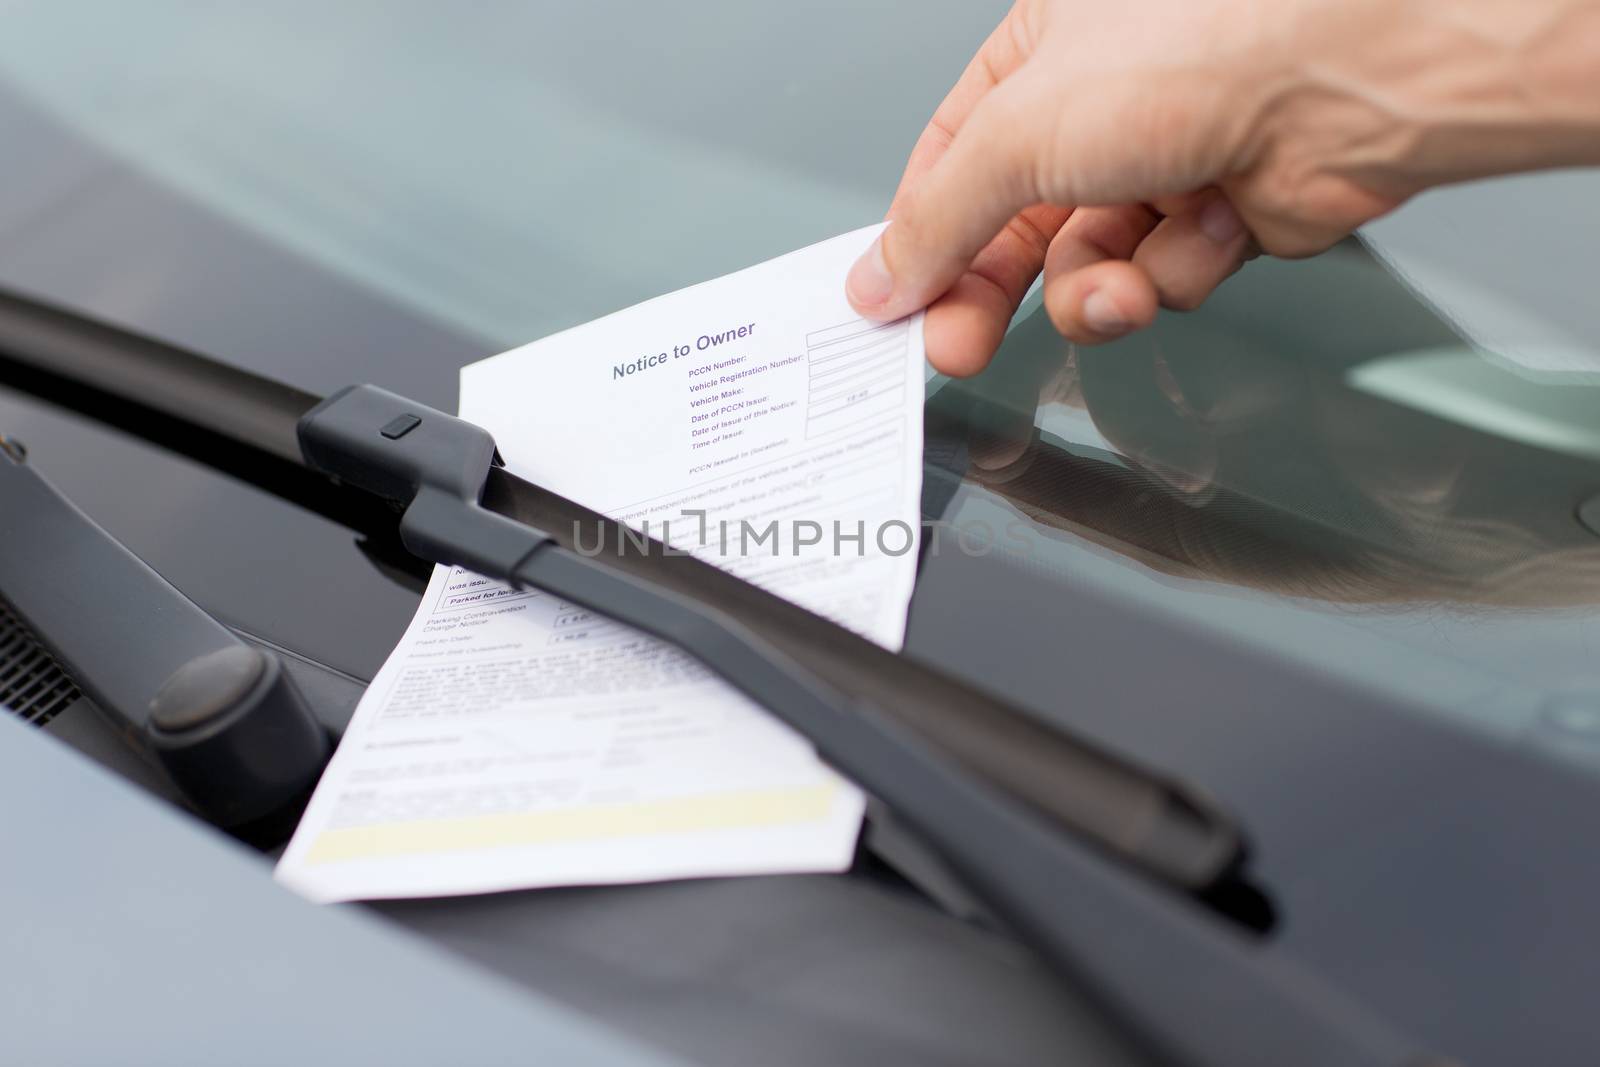 transportation and vehicle concept - parking ticket on car windscreen